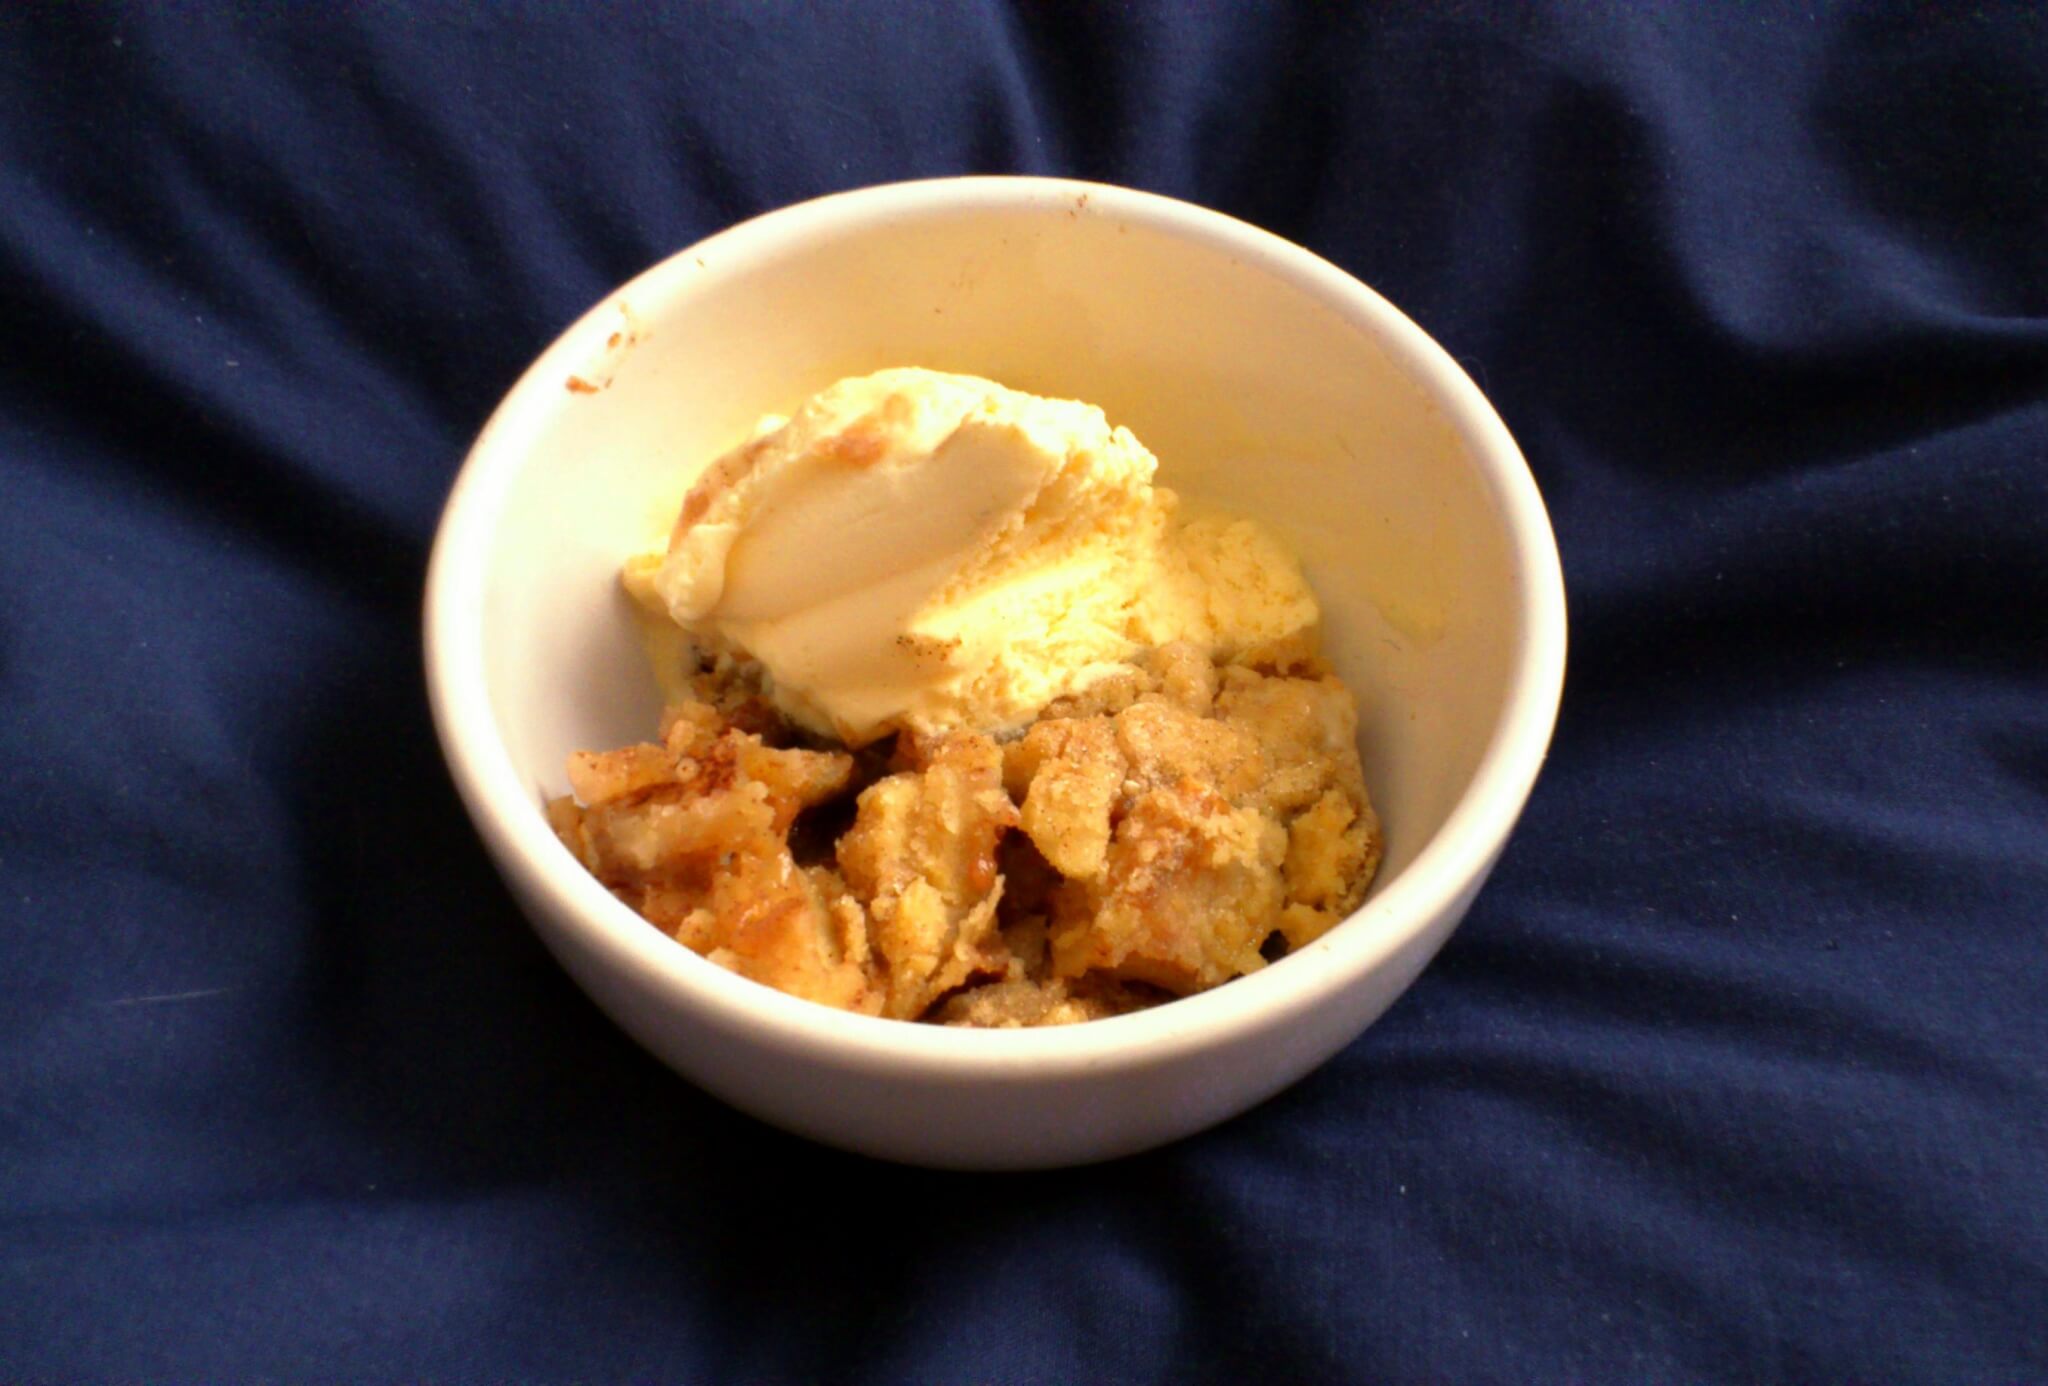 Apple and Peach crumble with ice cream